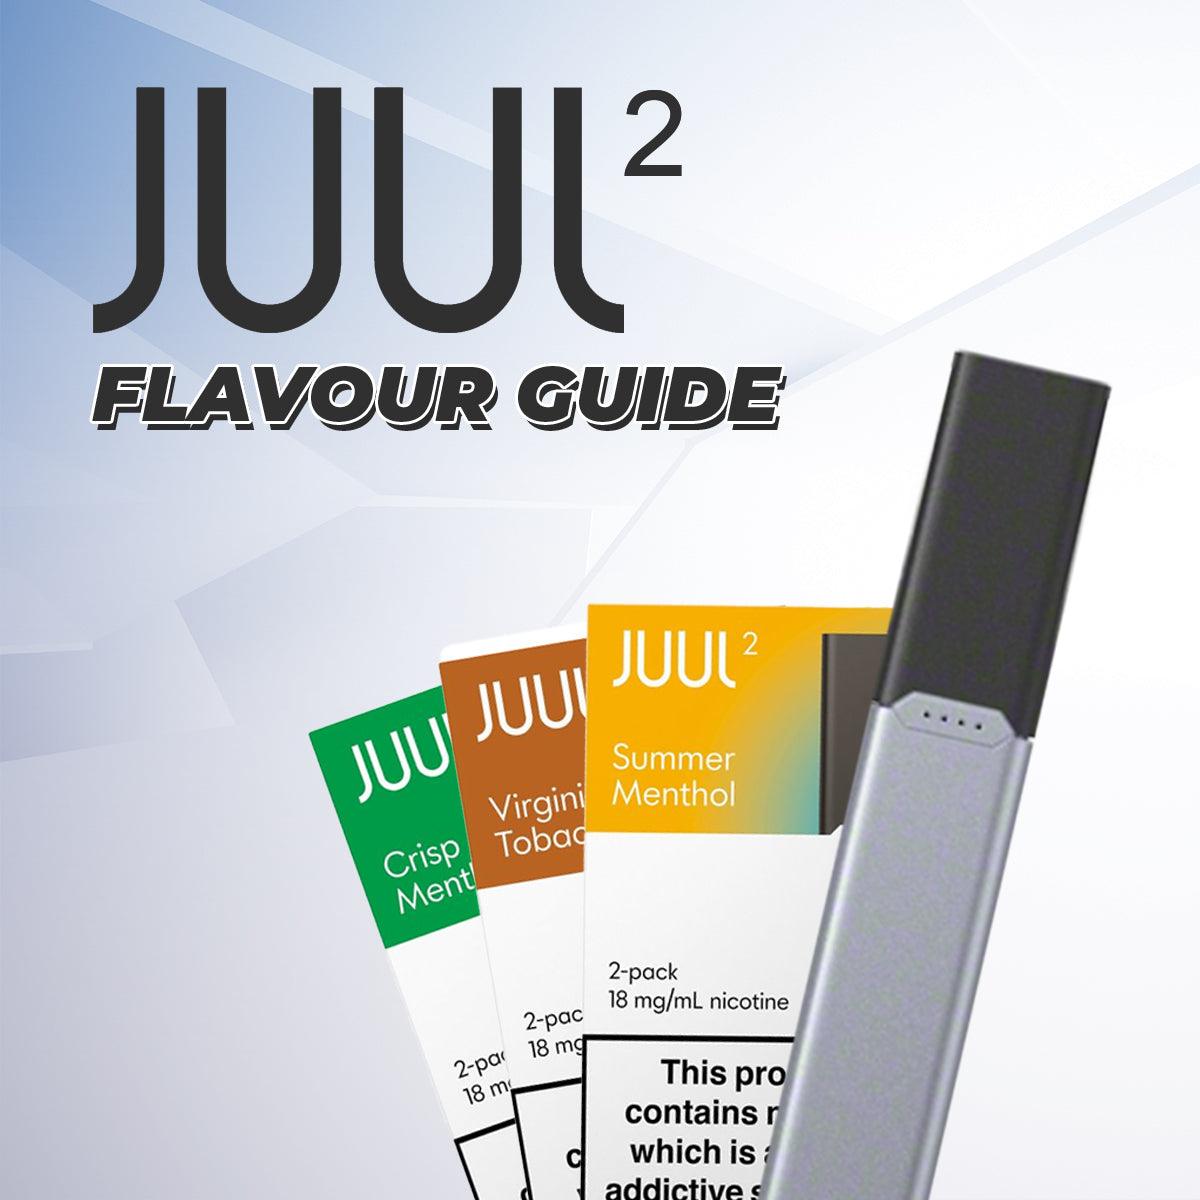 Juul2 Flavour Guide